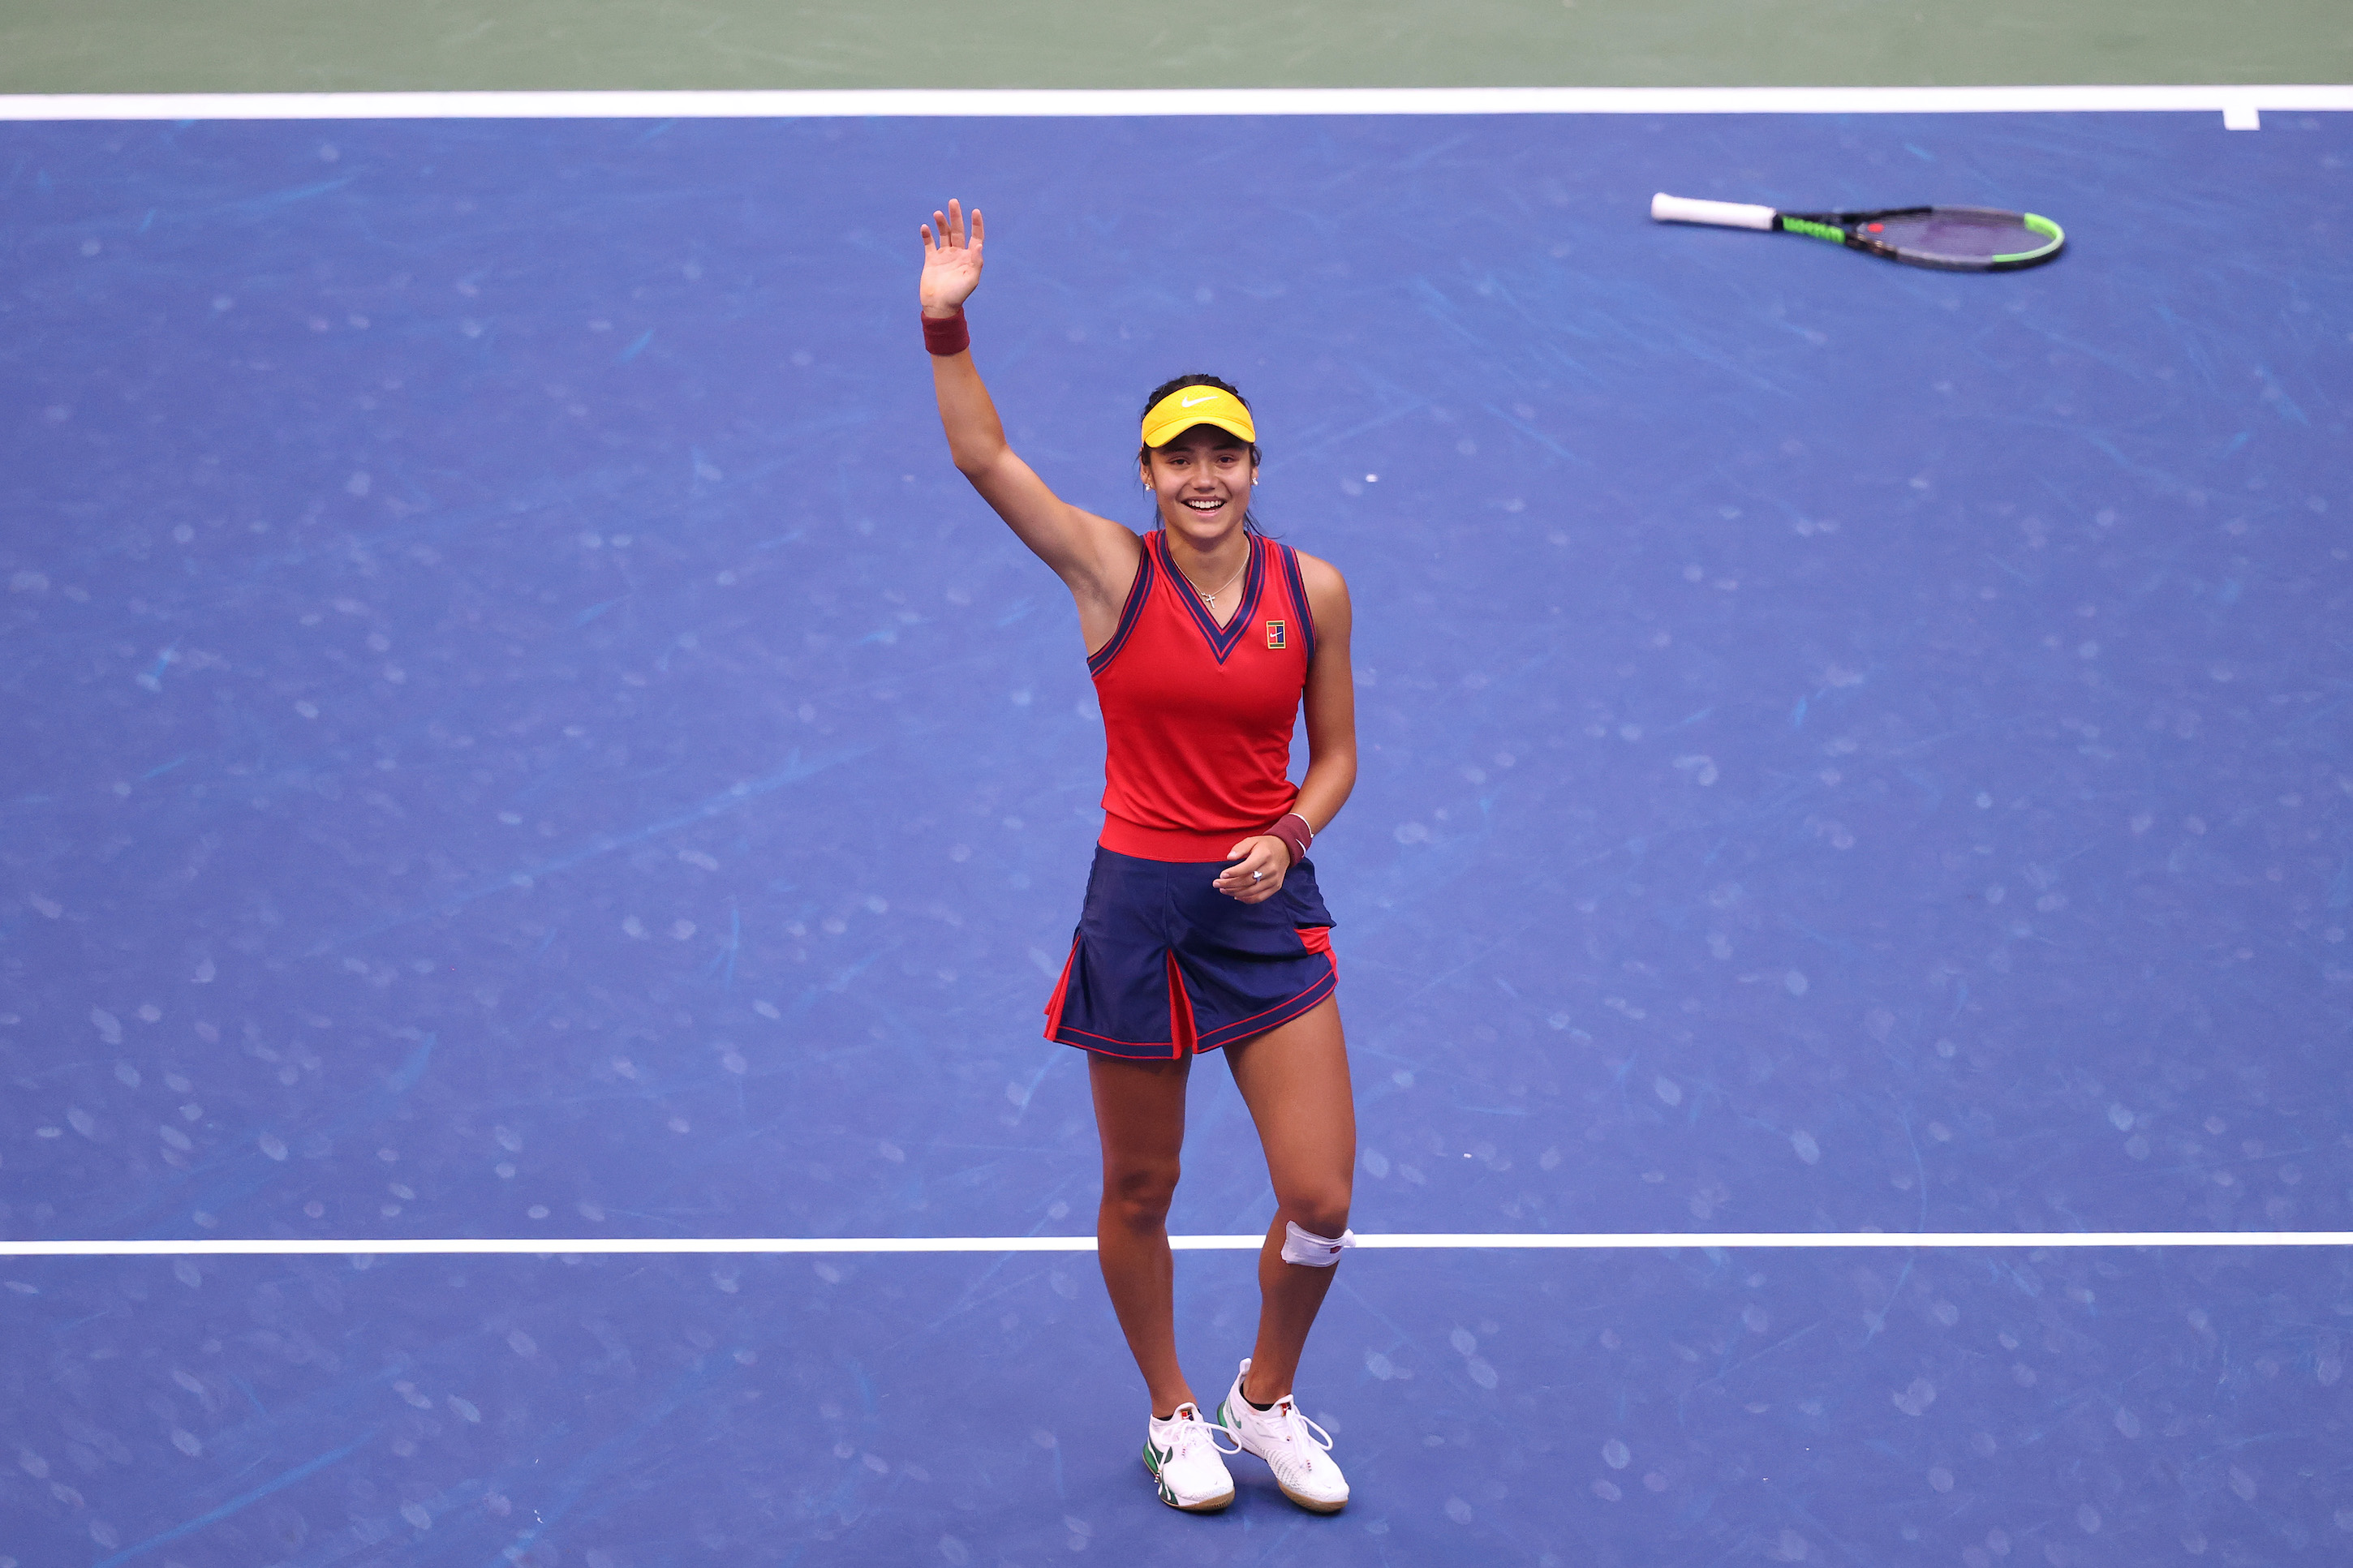 Emma Raducanu of Great Britain celebrates after winning championship point to defeat Leylah Annie Fernandez of Canada during the second set of their Women's Singles final match on Day Thirteen of the 2021 US Open at the USTA Billie Jean King National Tennis Center on September 11, 2021 in the Flushing neighborhood of the Queens borough of New York City.